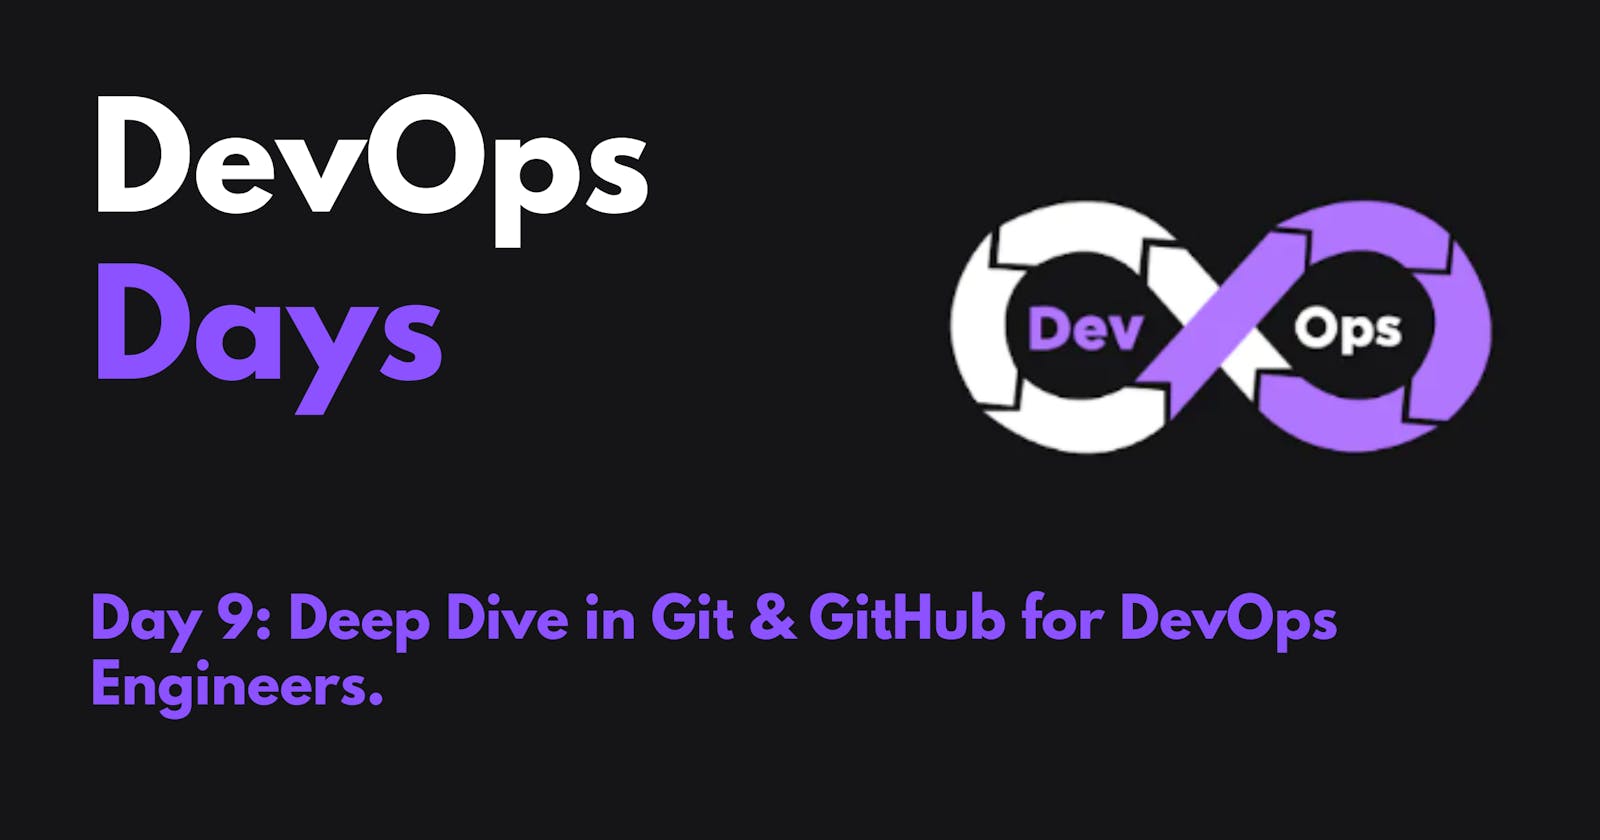 Day 9: Deep Dive in Git & GitHub for DevOps Engineers.